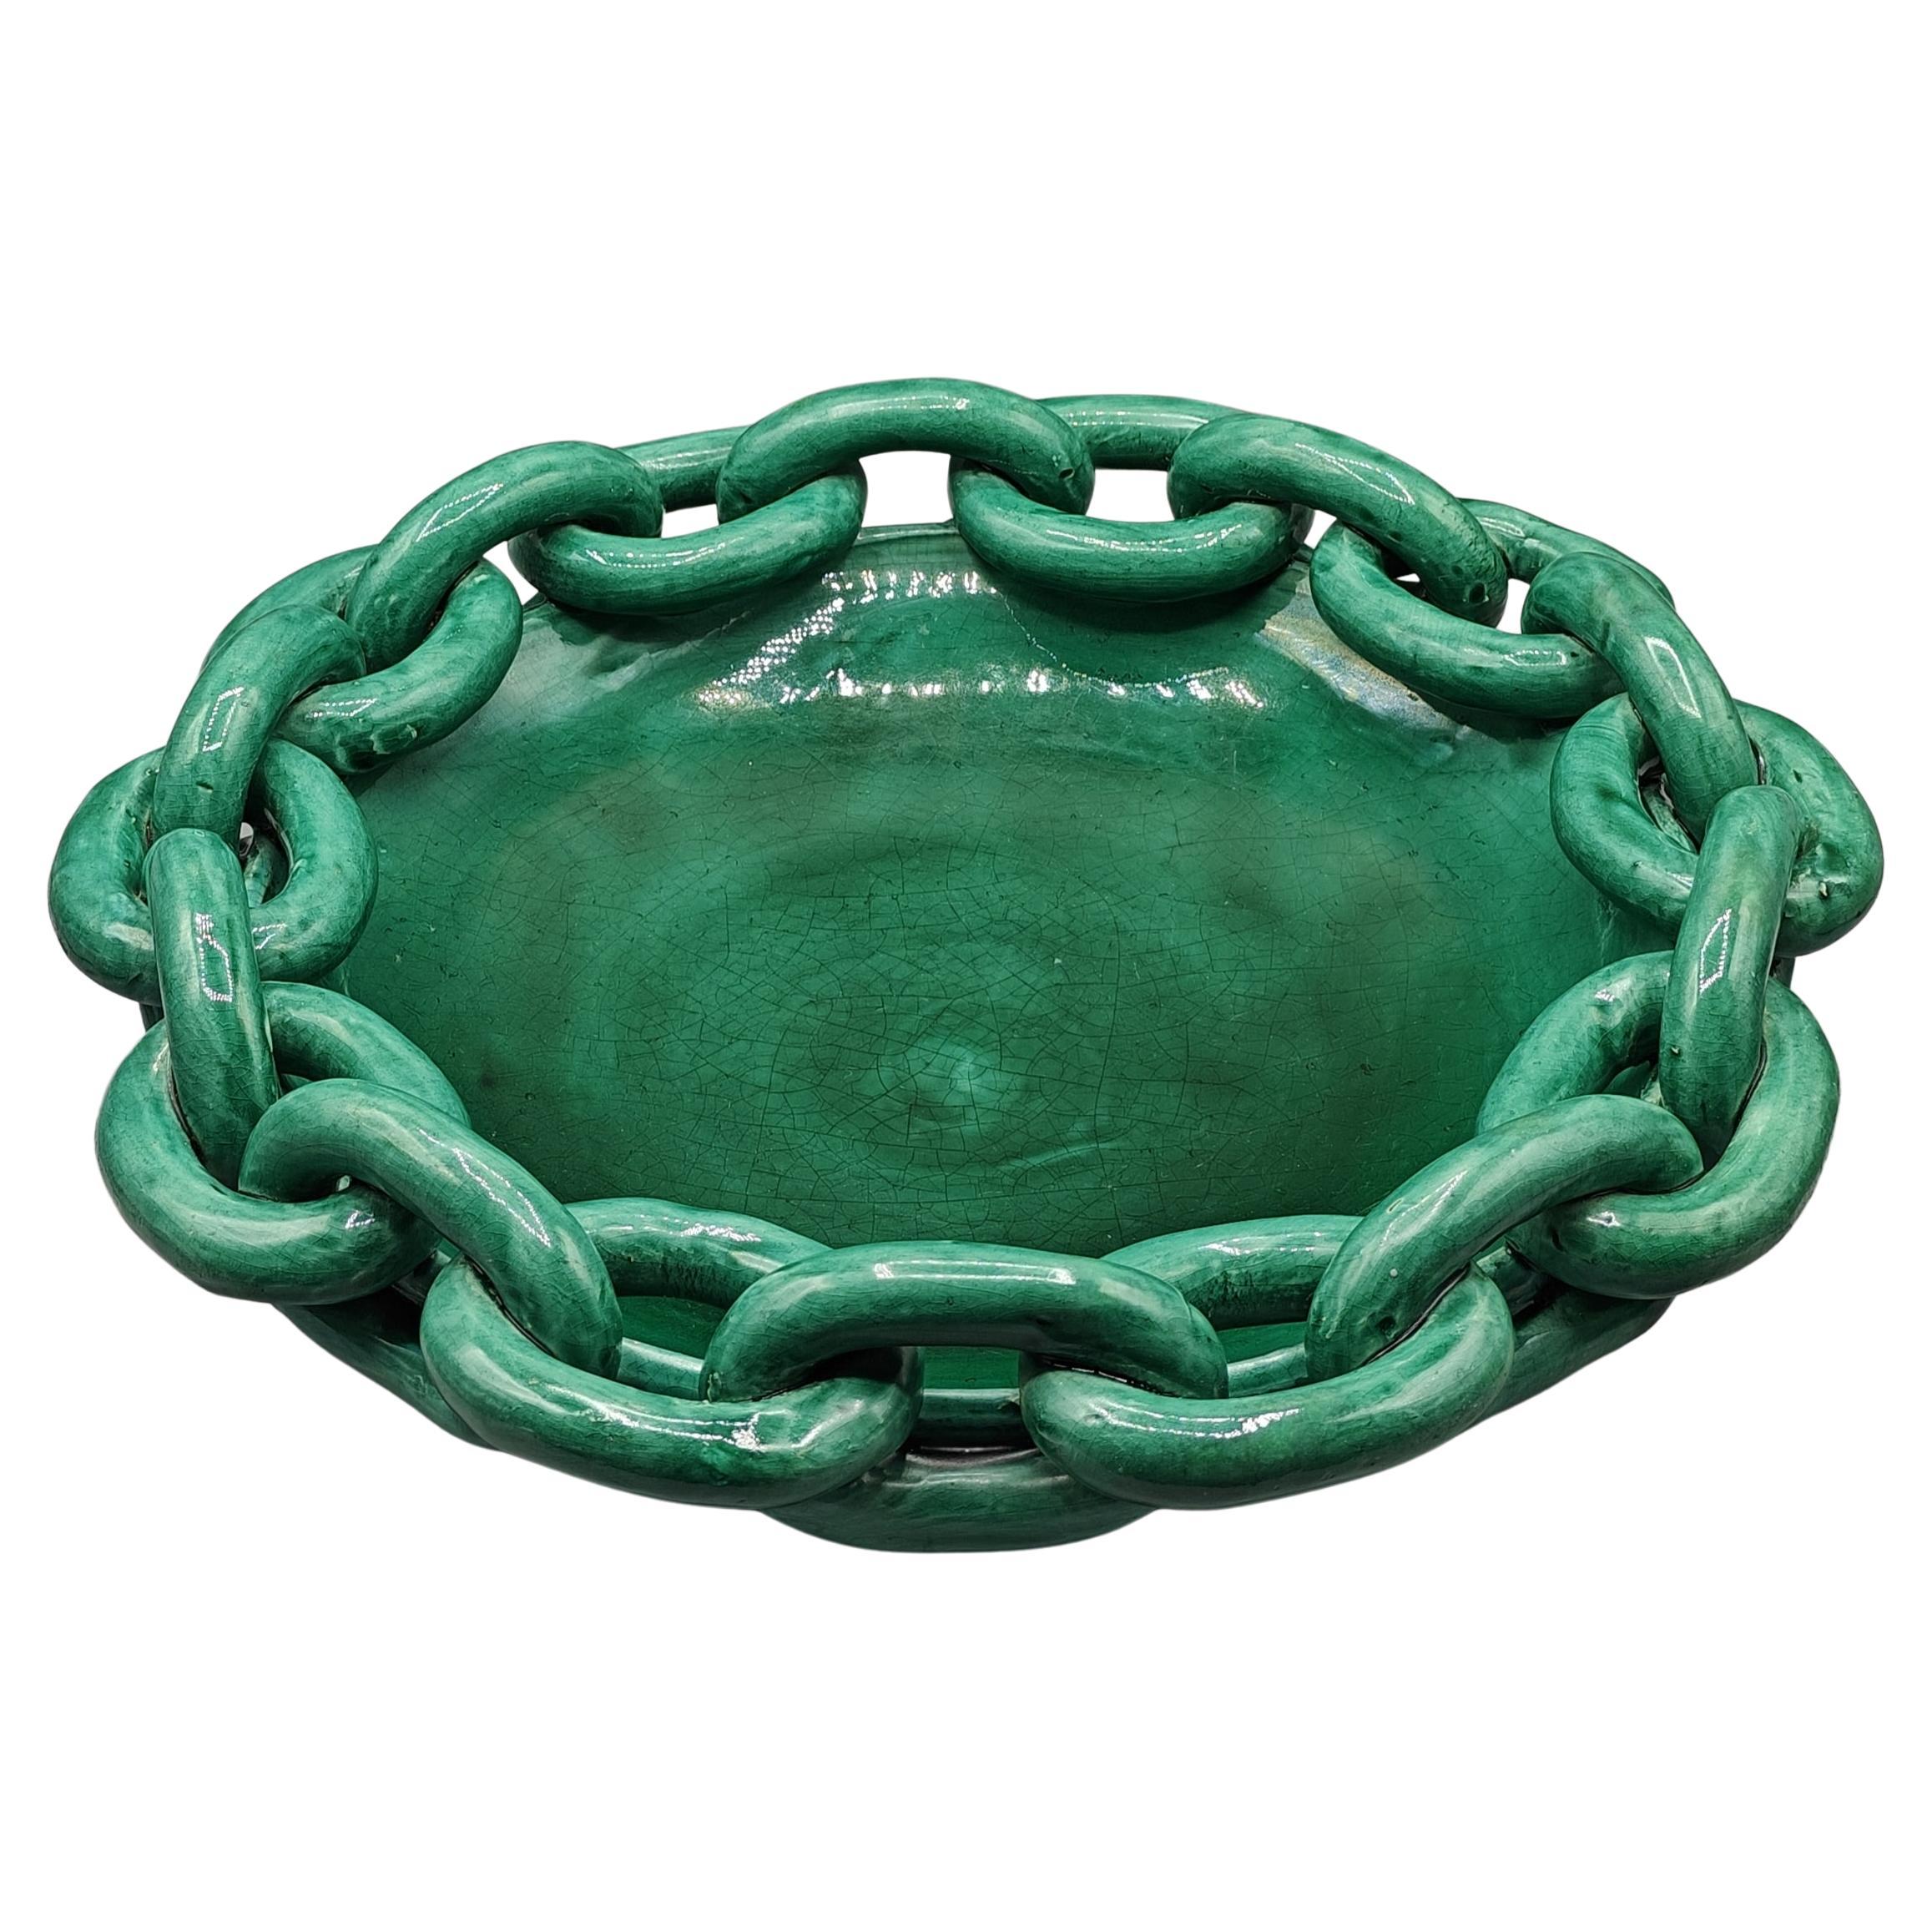 Important green ceramic bowl from Vallauris